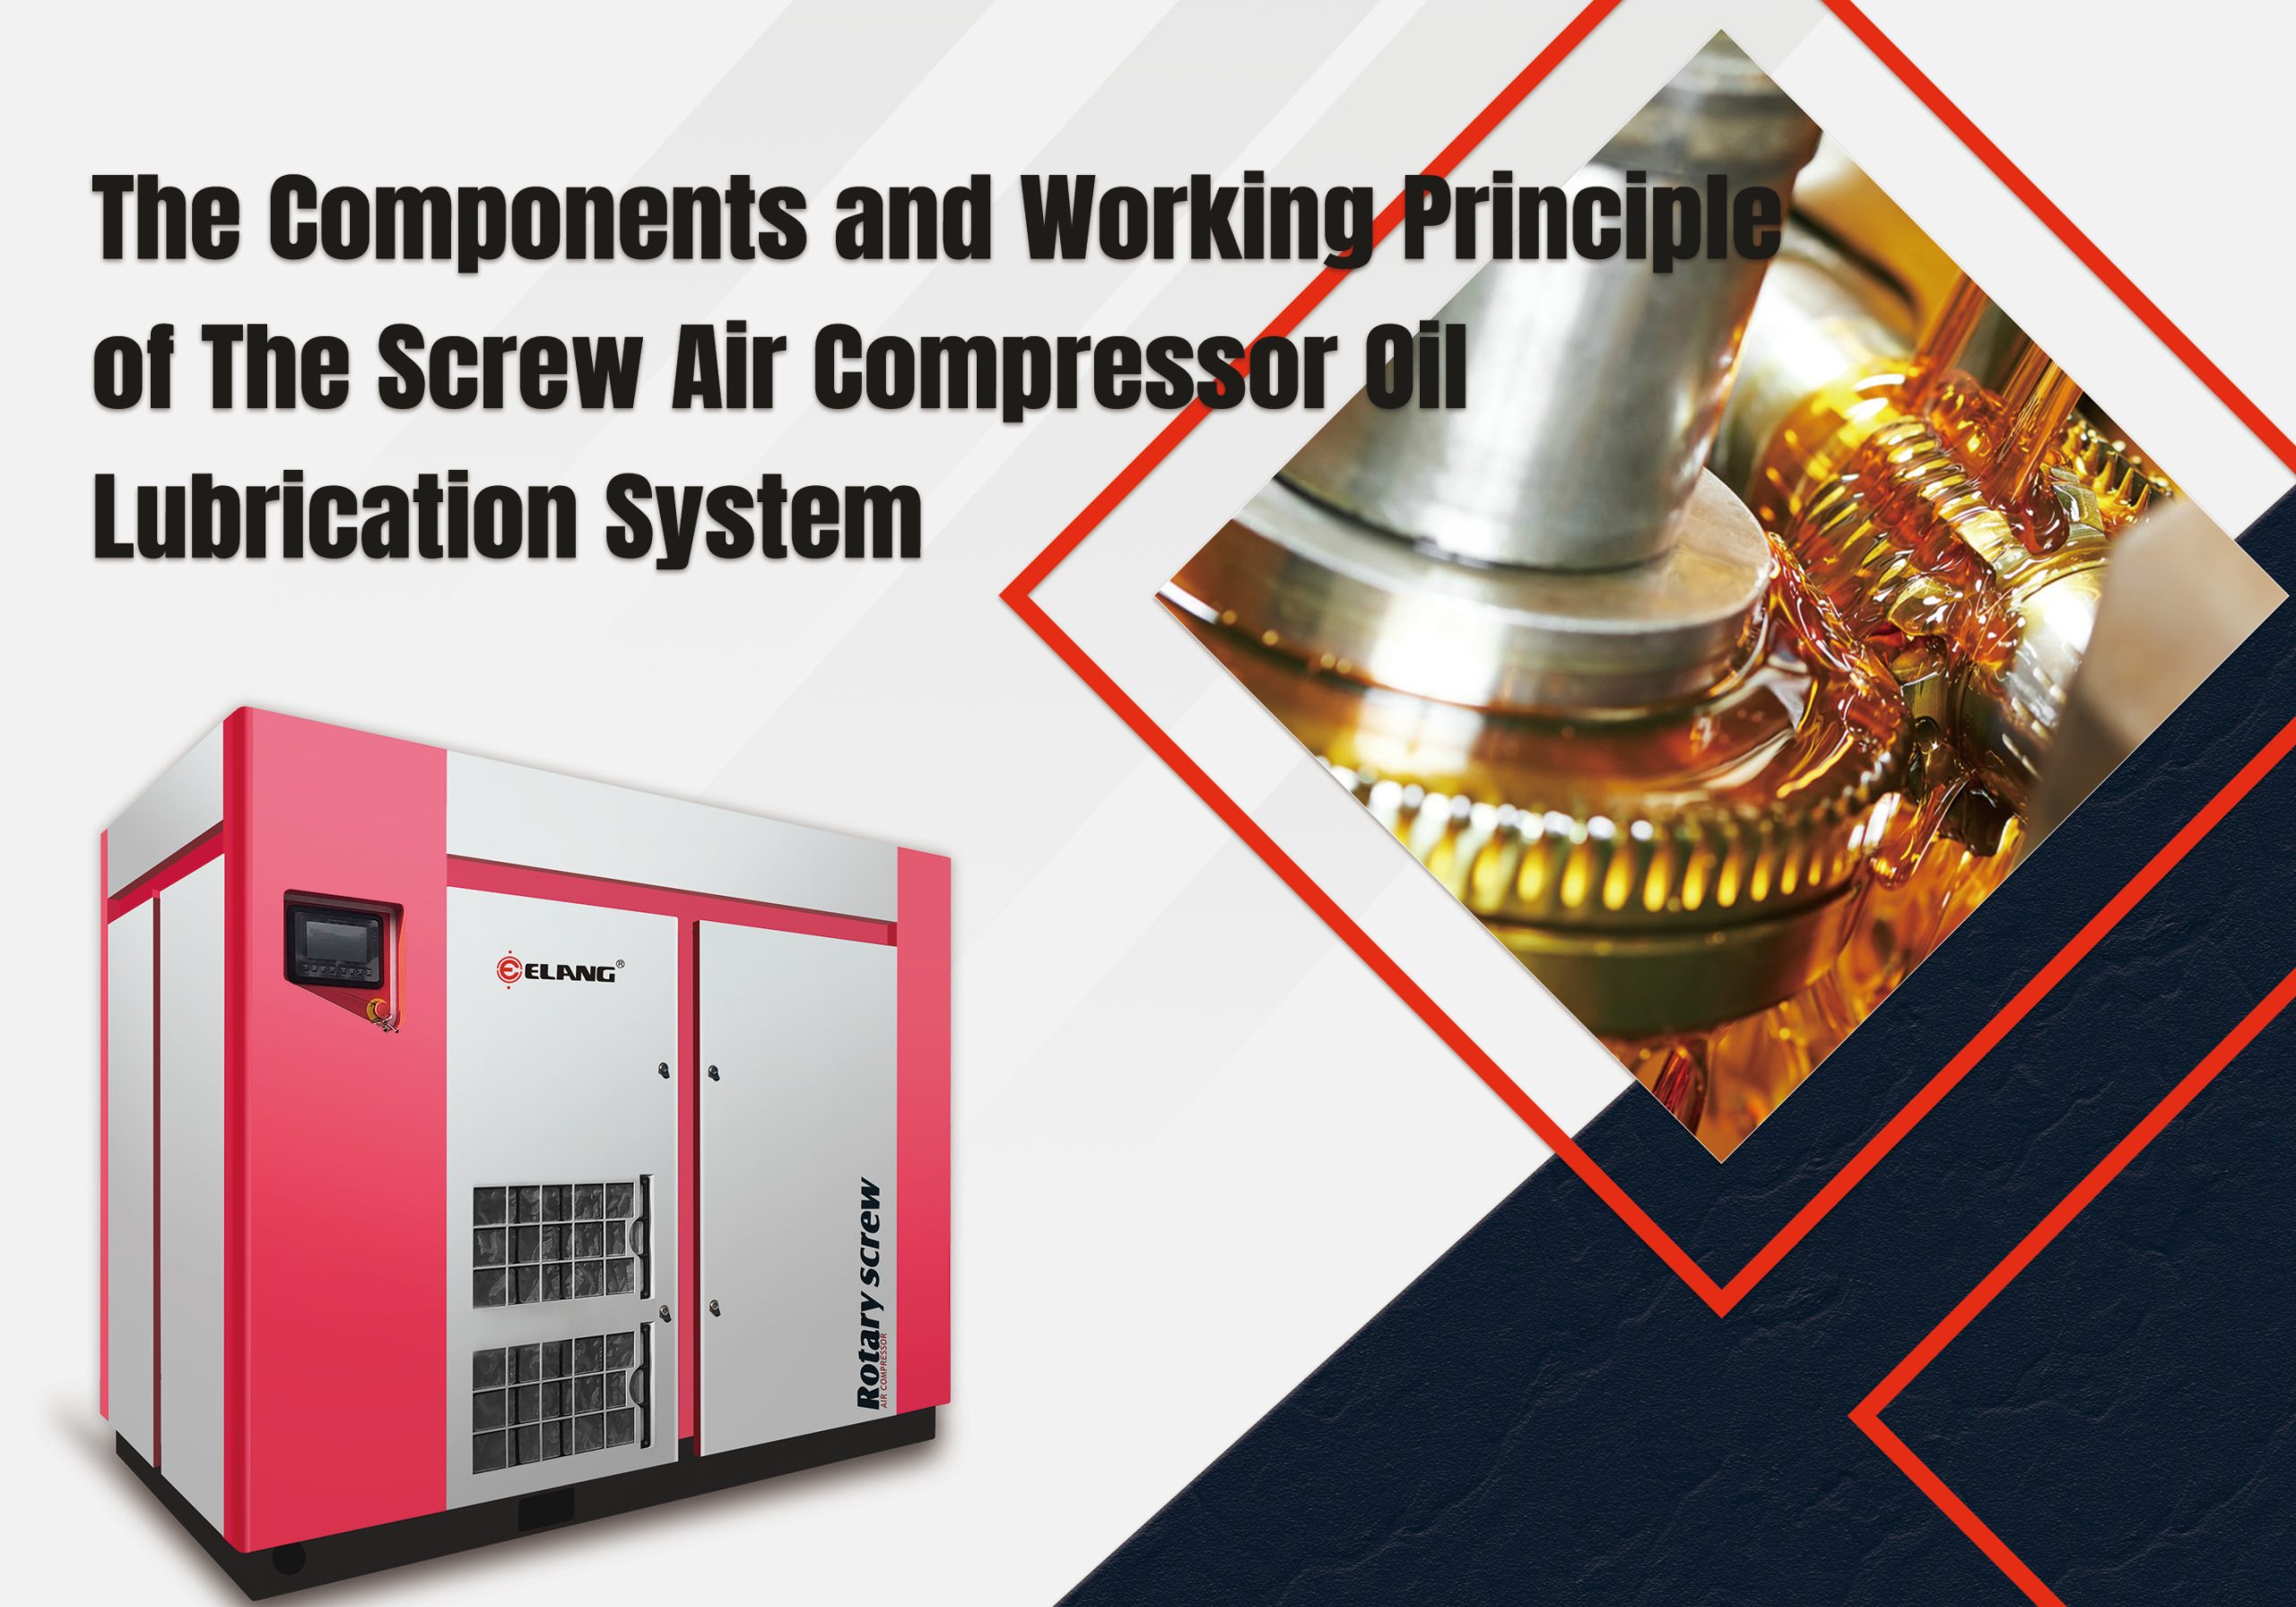 The Components and Working Principle of The Screw Air Compressor Oil Lubrication System